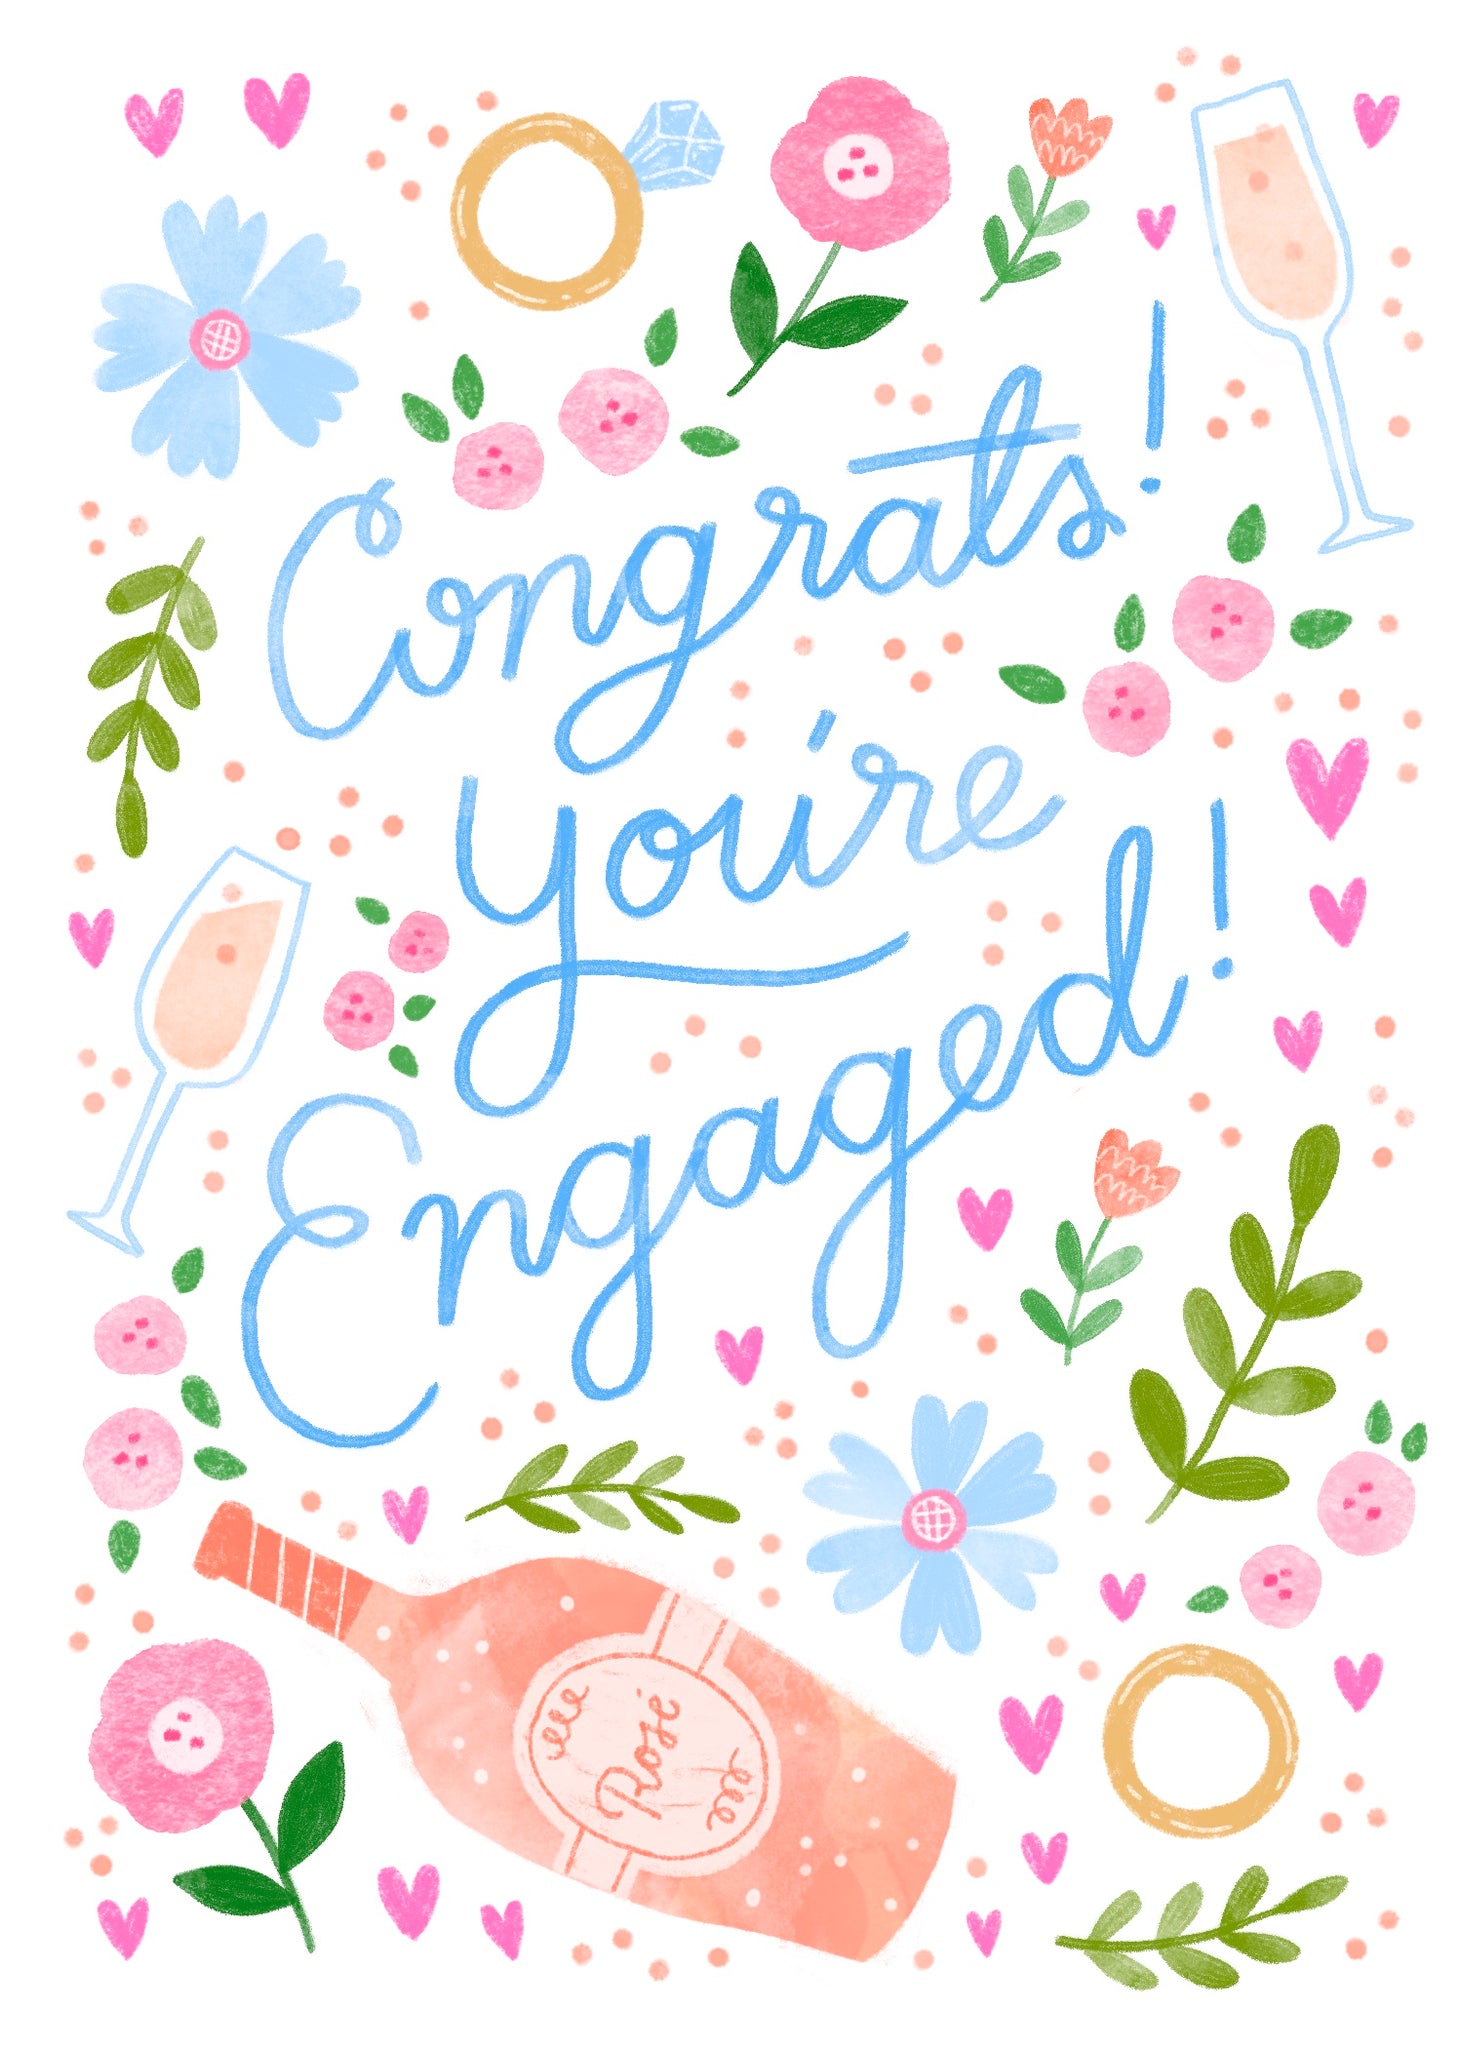 congrats you're engaged